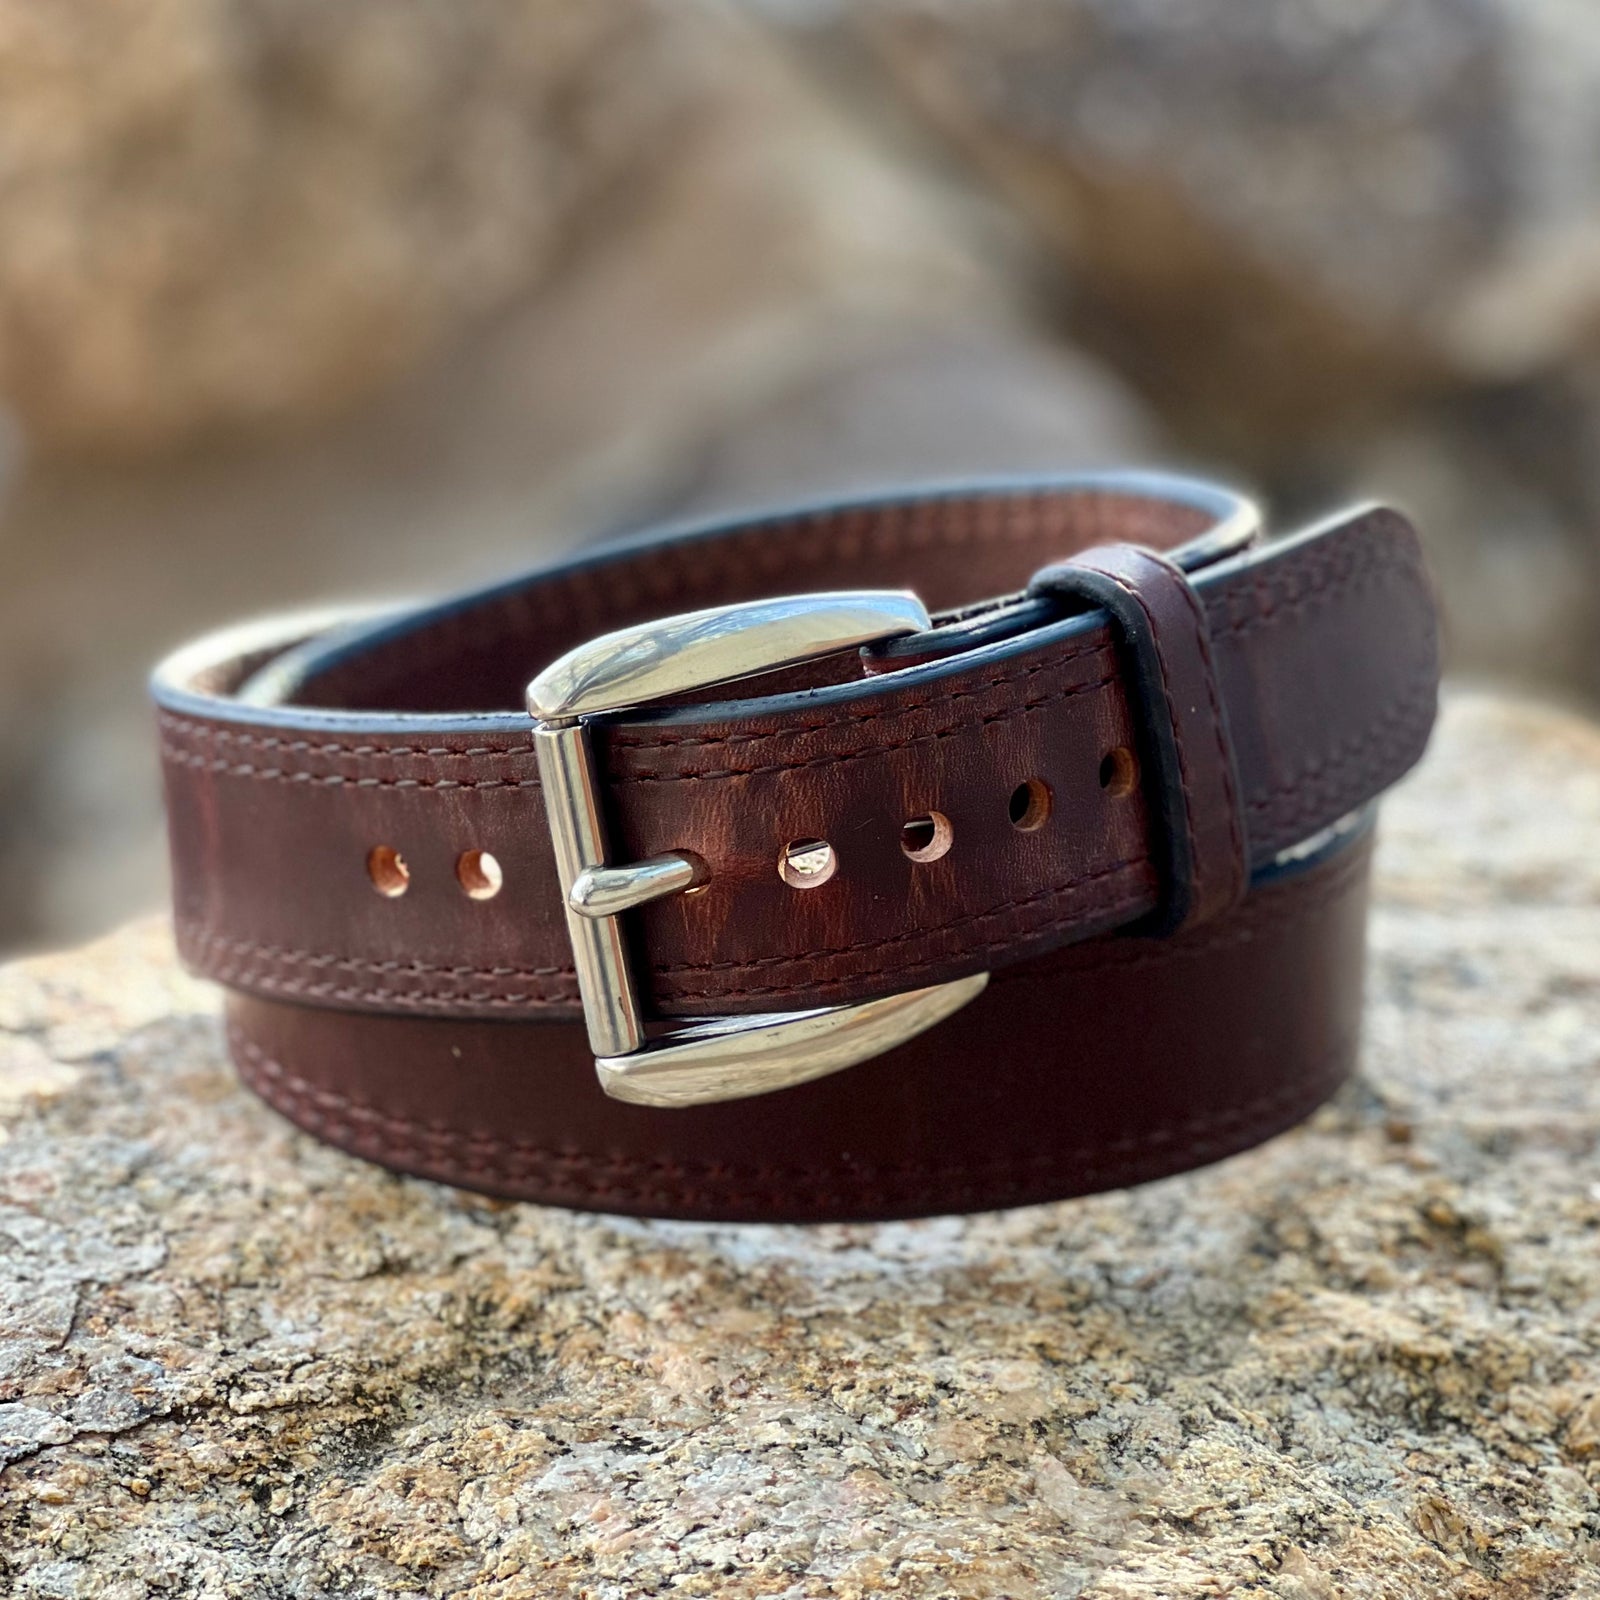 Buy Brown Classic Buckle Belt by HALDÈN Online at Aza Fashions.